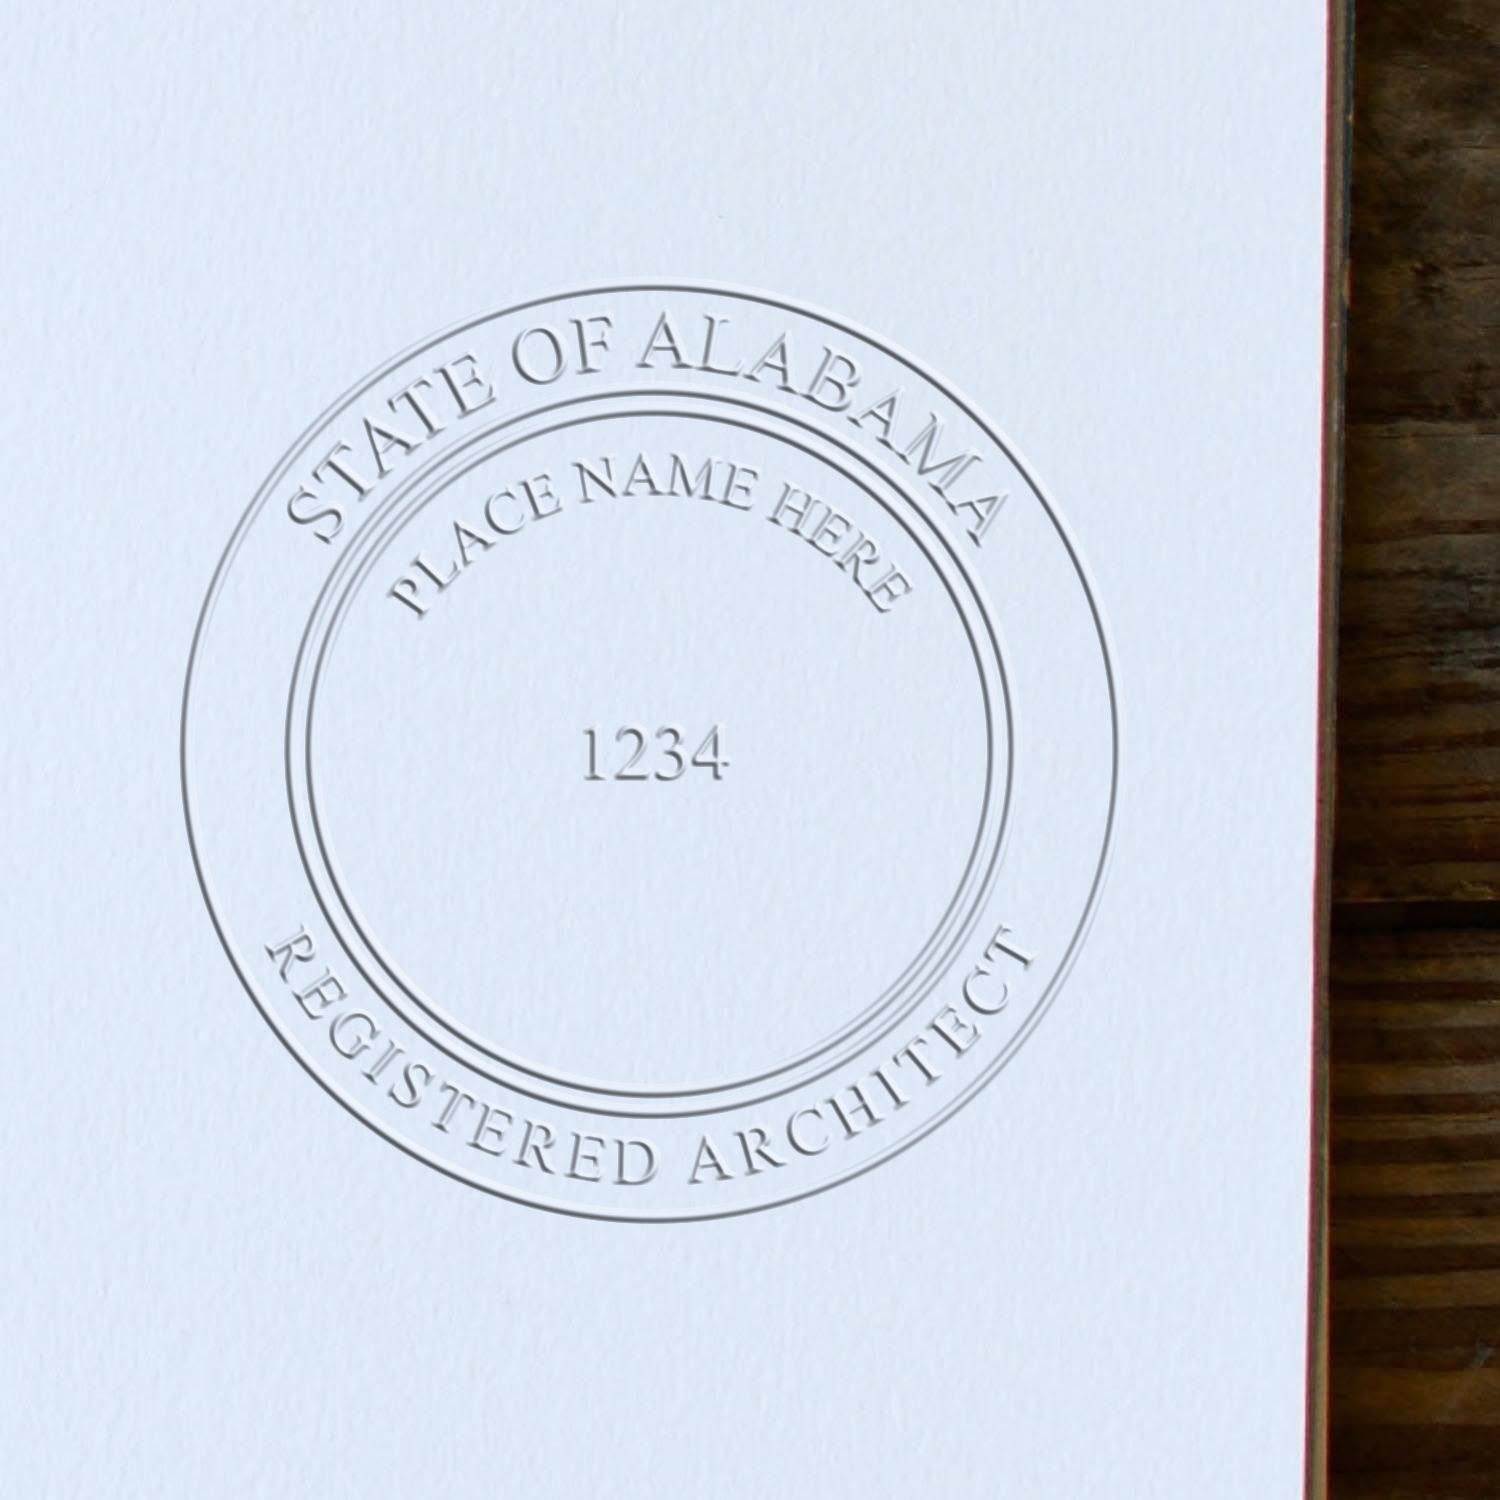 The State of Alabama Long Reach Architectural Embossing Seal stamp impression comes to life with a crisp, detailed photo on paper - showcasing true professional quality.